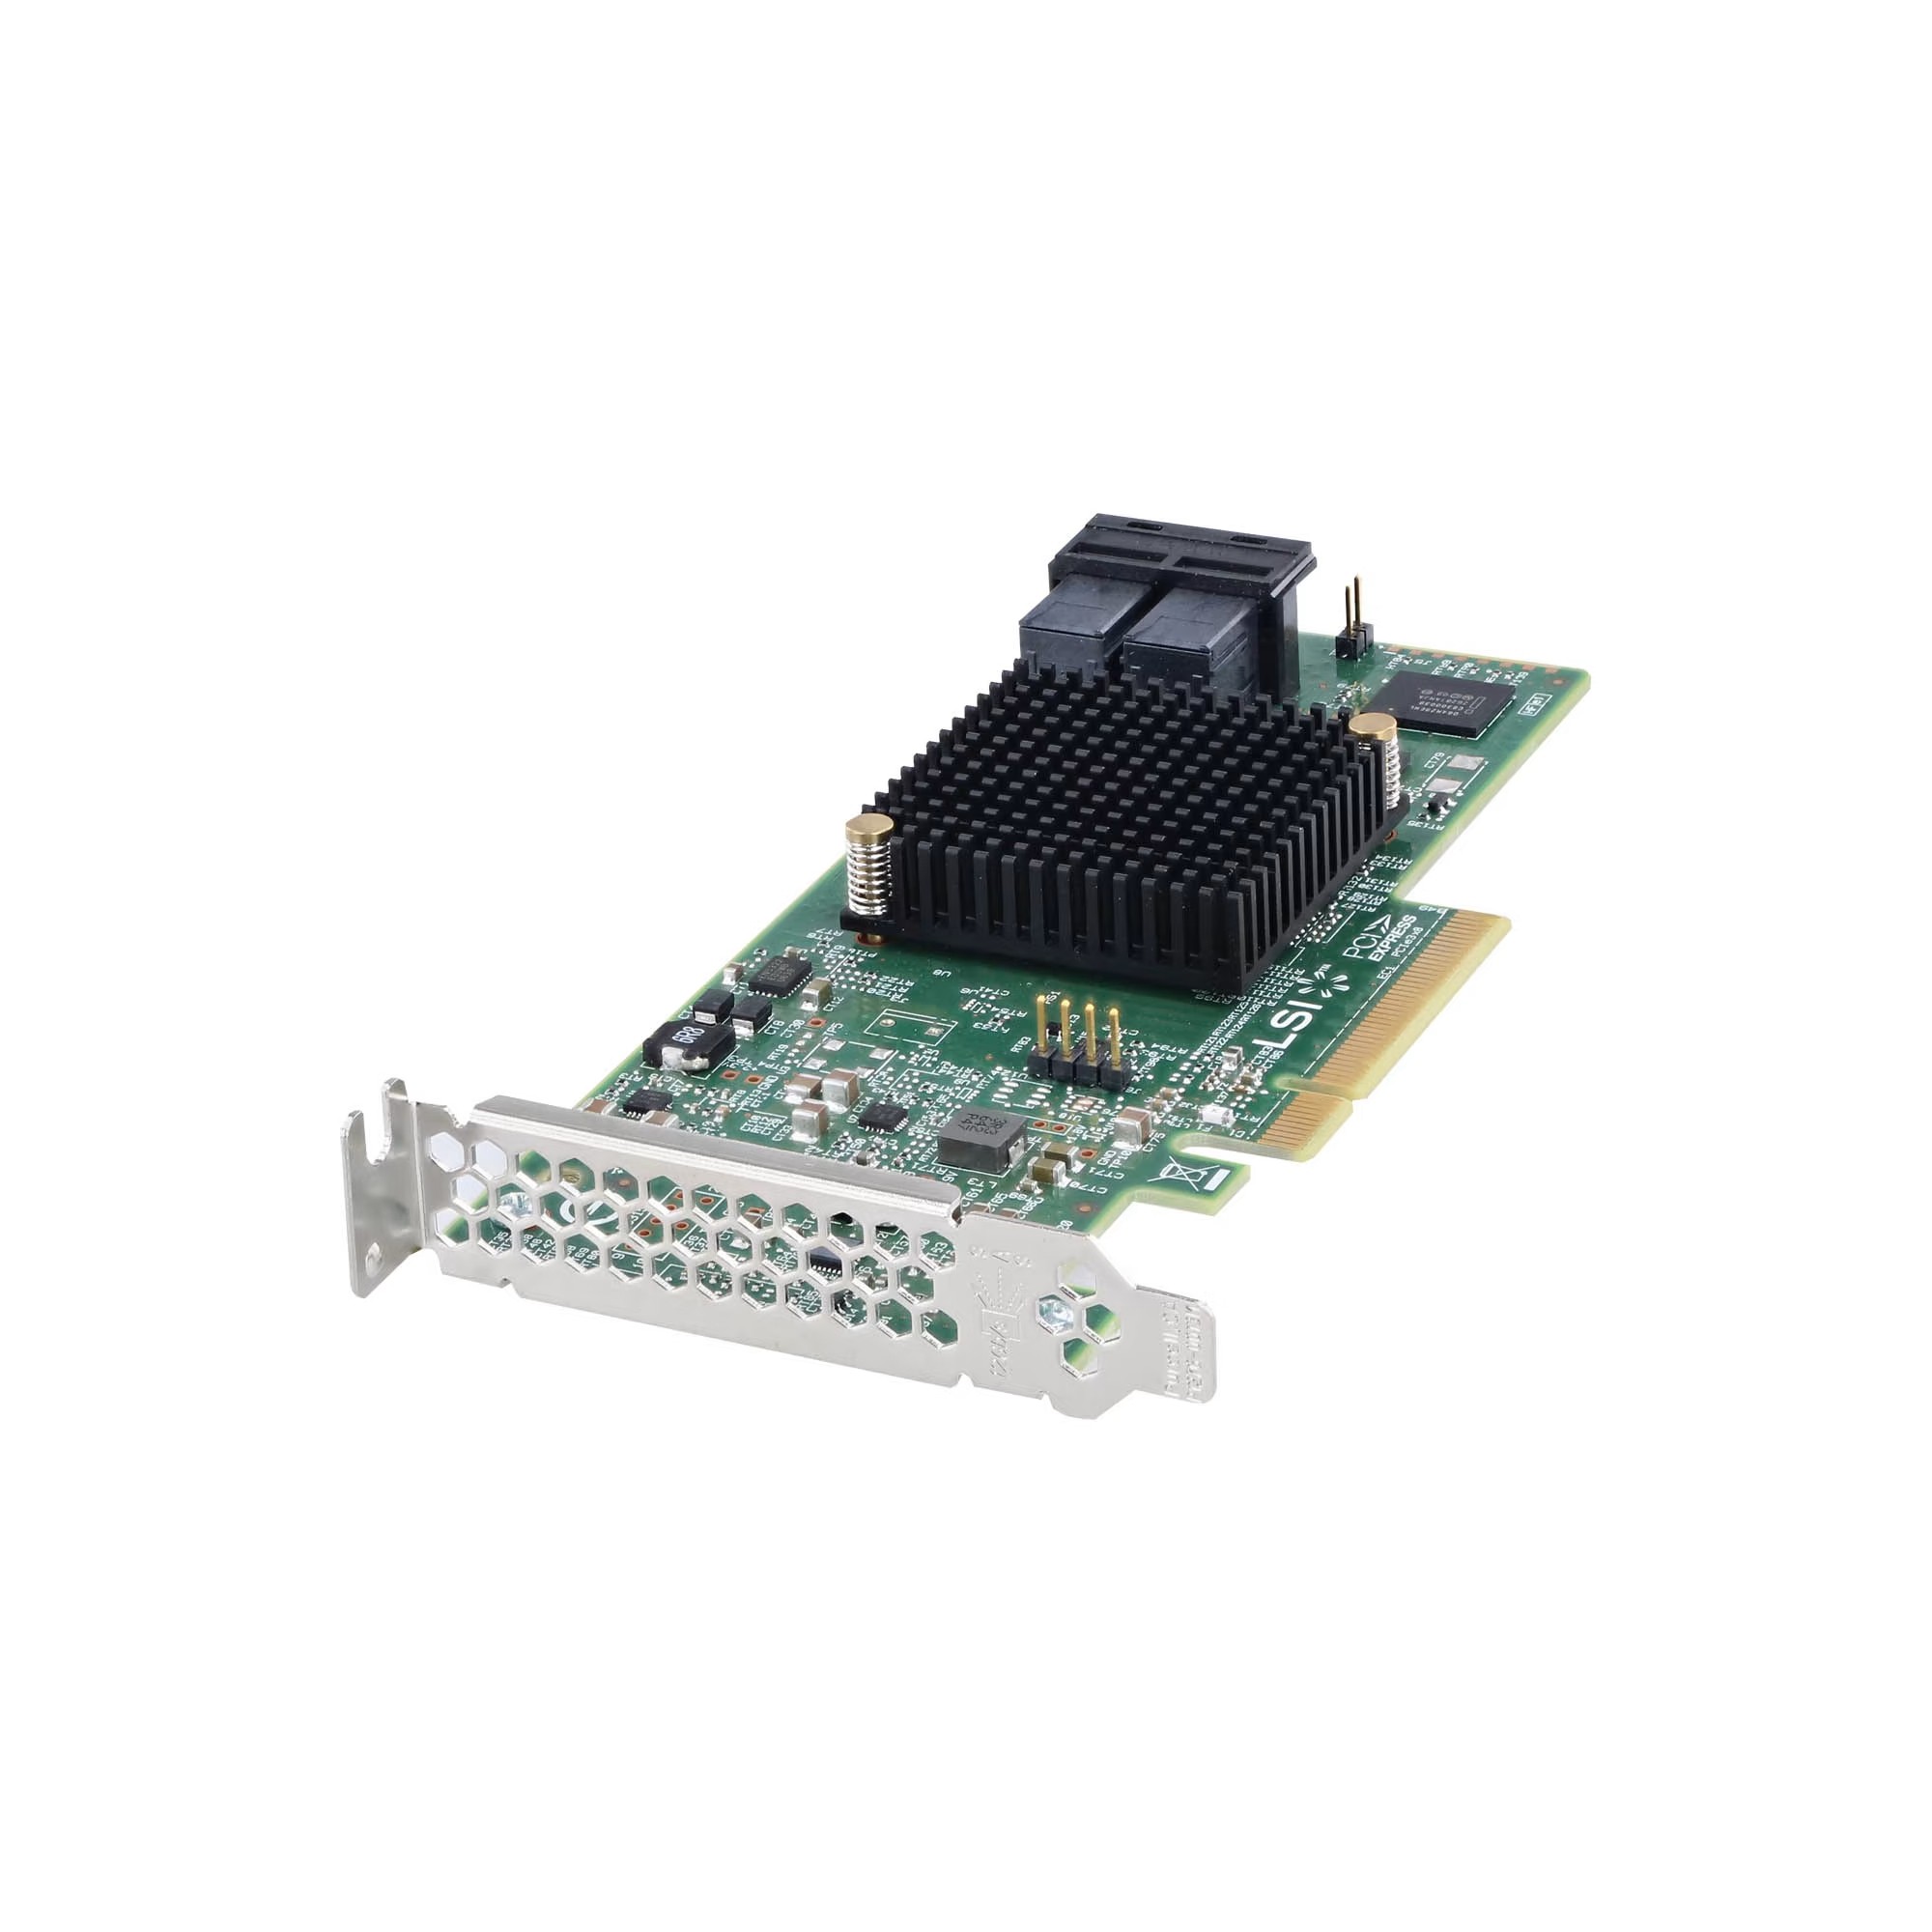 LSI SAS 9311-8i 12G - Low Profile PCIe Host Bus Adapter